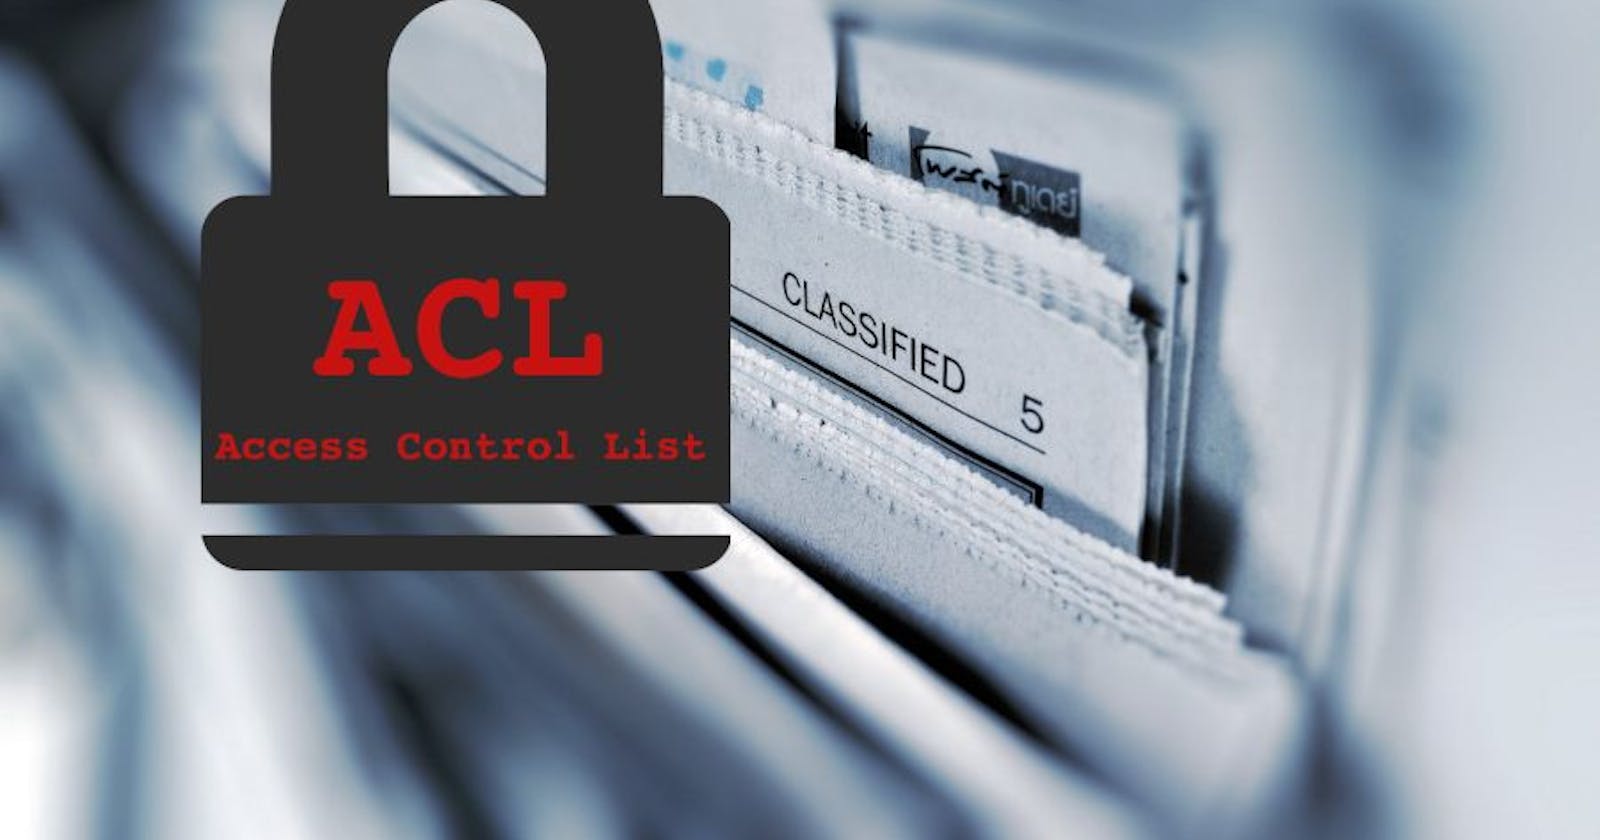 File Permissions and Access Control Lists(ACLs) in Linux